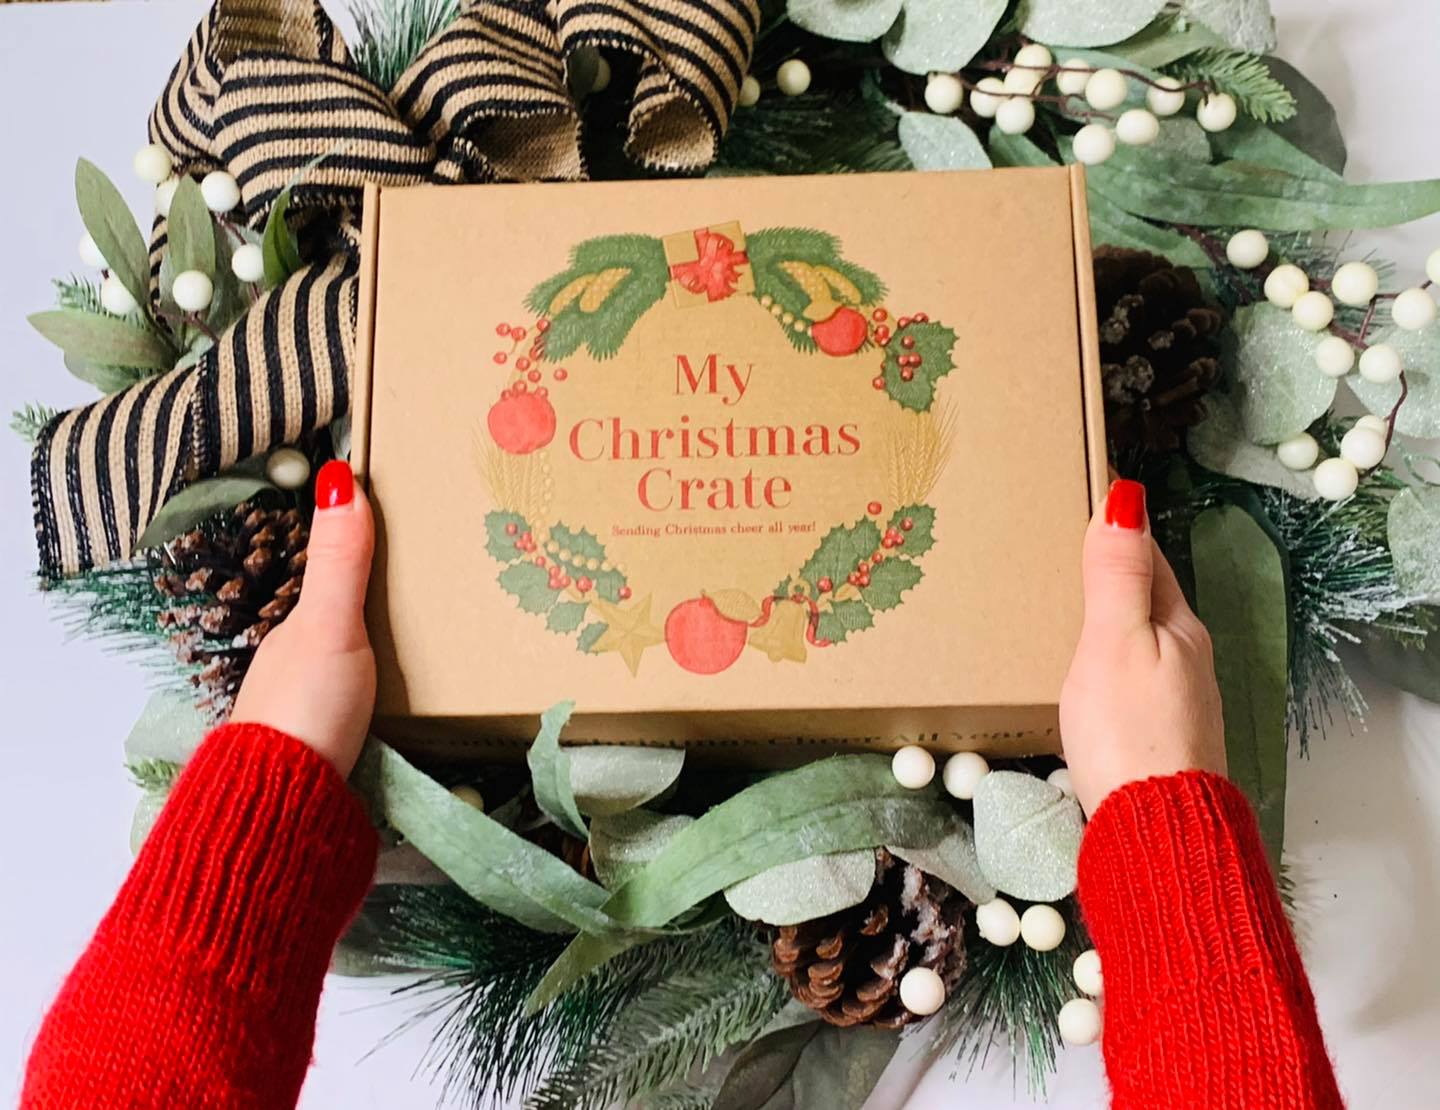 My Christmas Crate Holiday 2022 Deal: Get $10 Off your first Christmas Crate